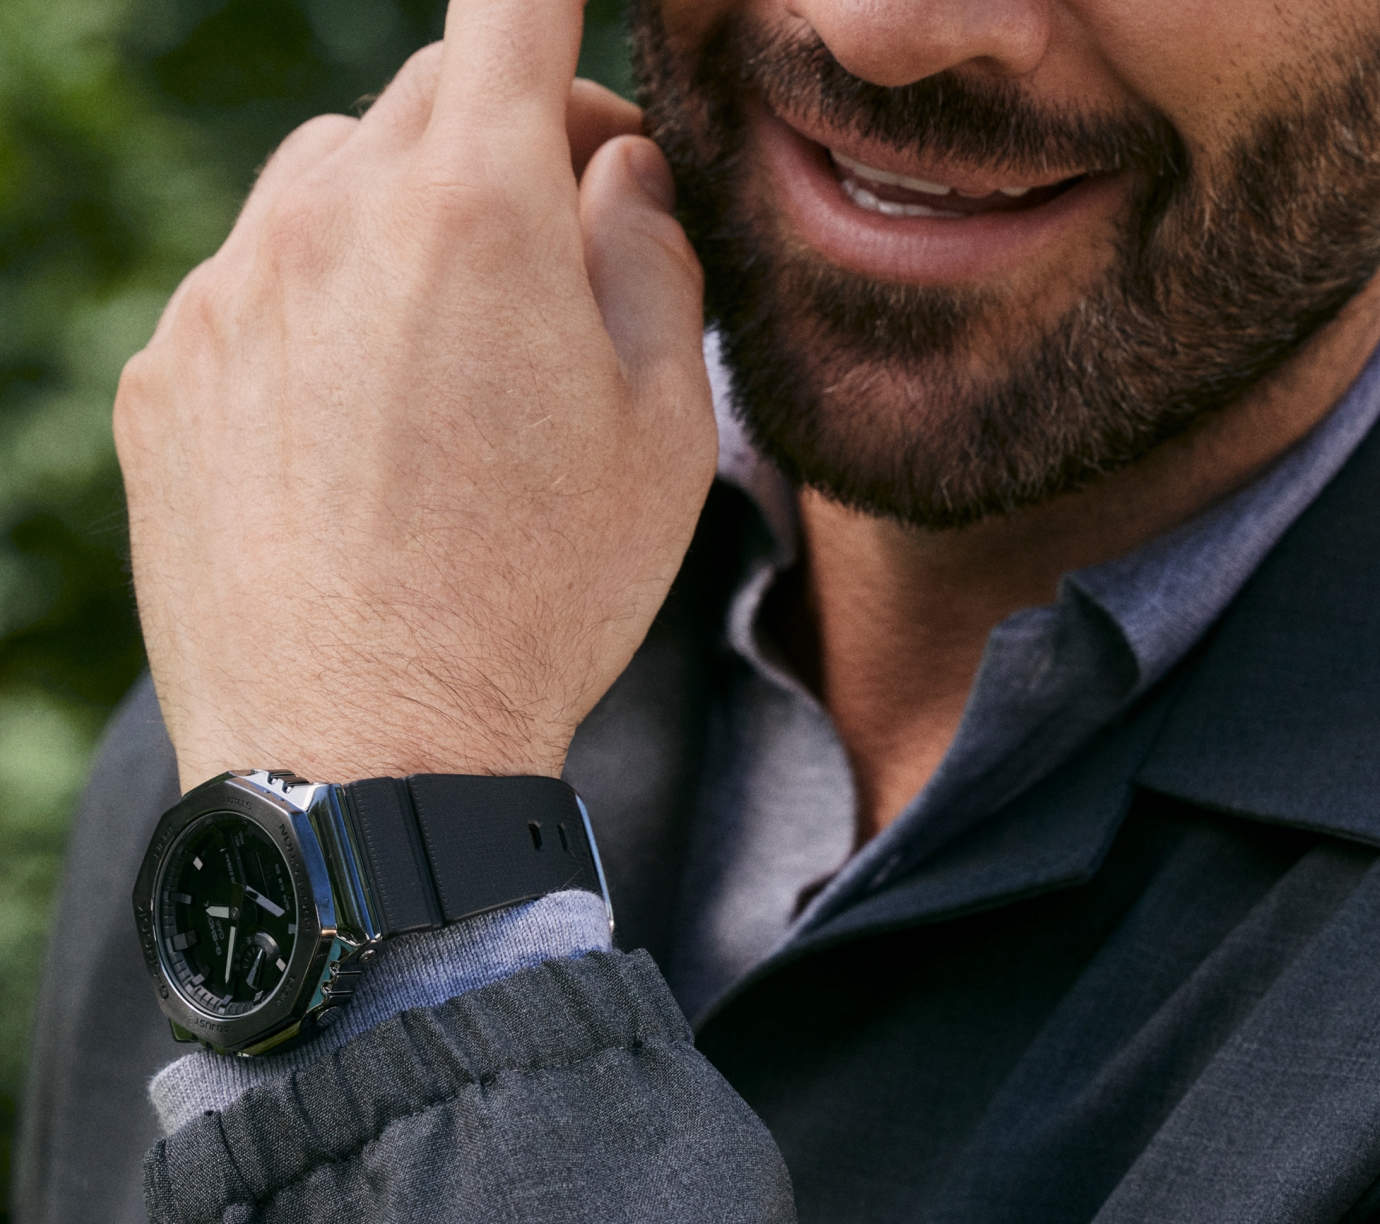 Men's Watches - Make every moment count with our sophisticated range of men's watches.